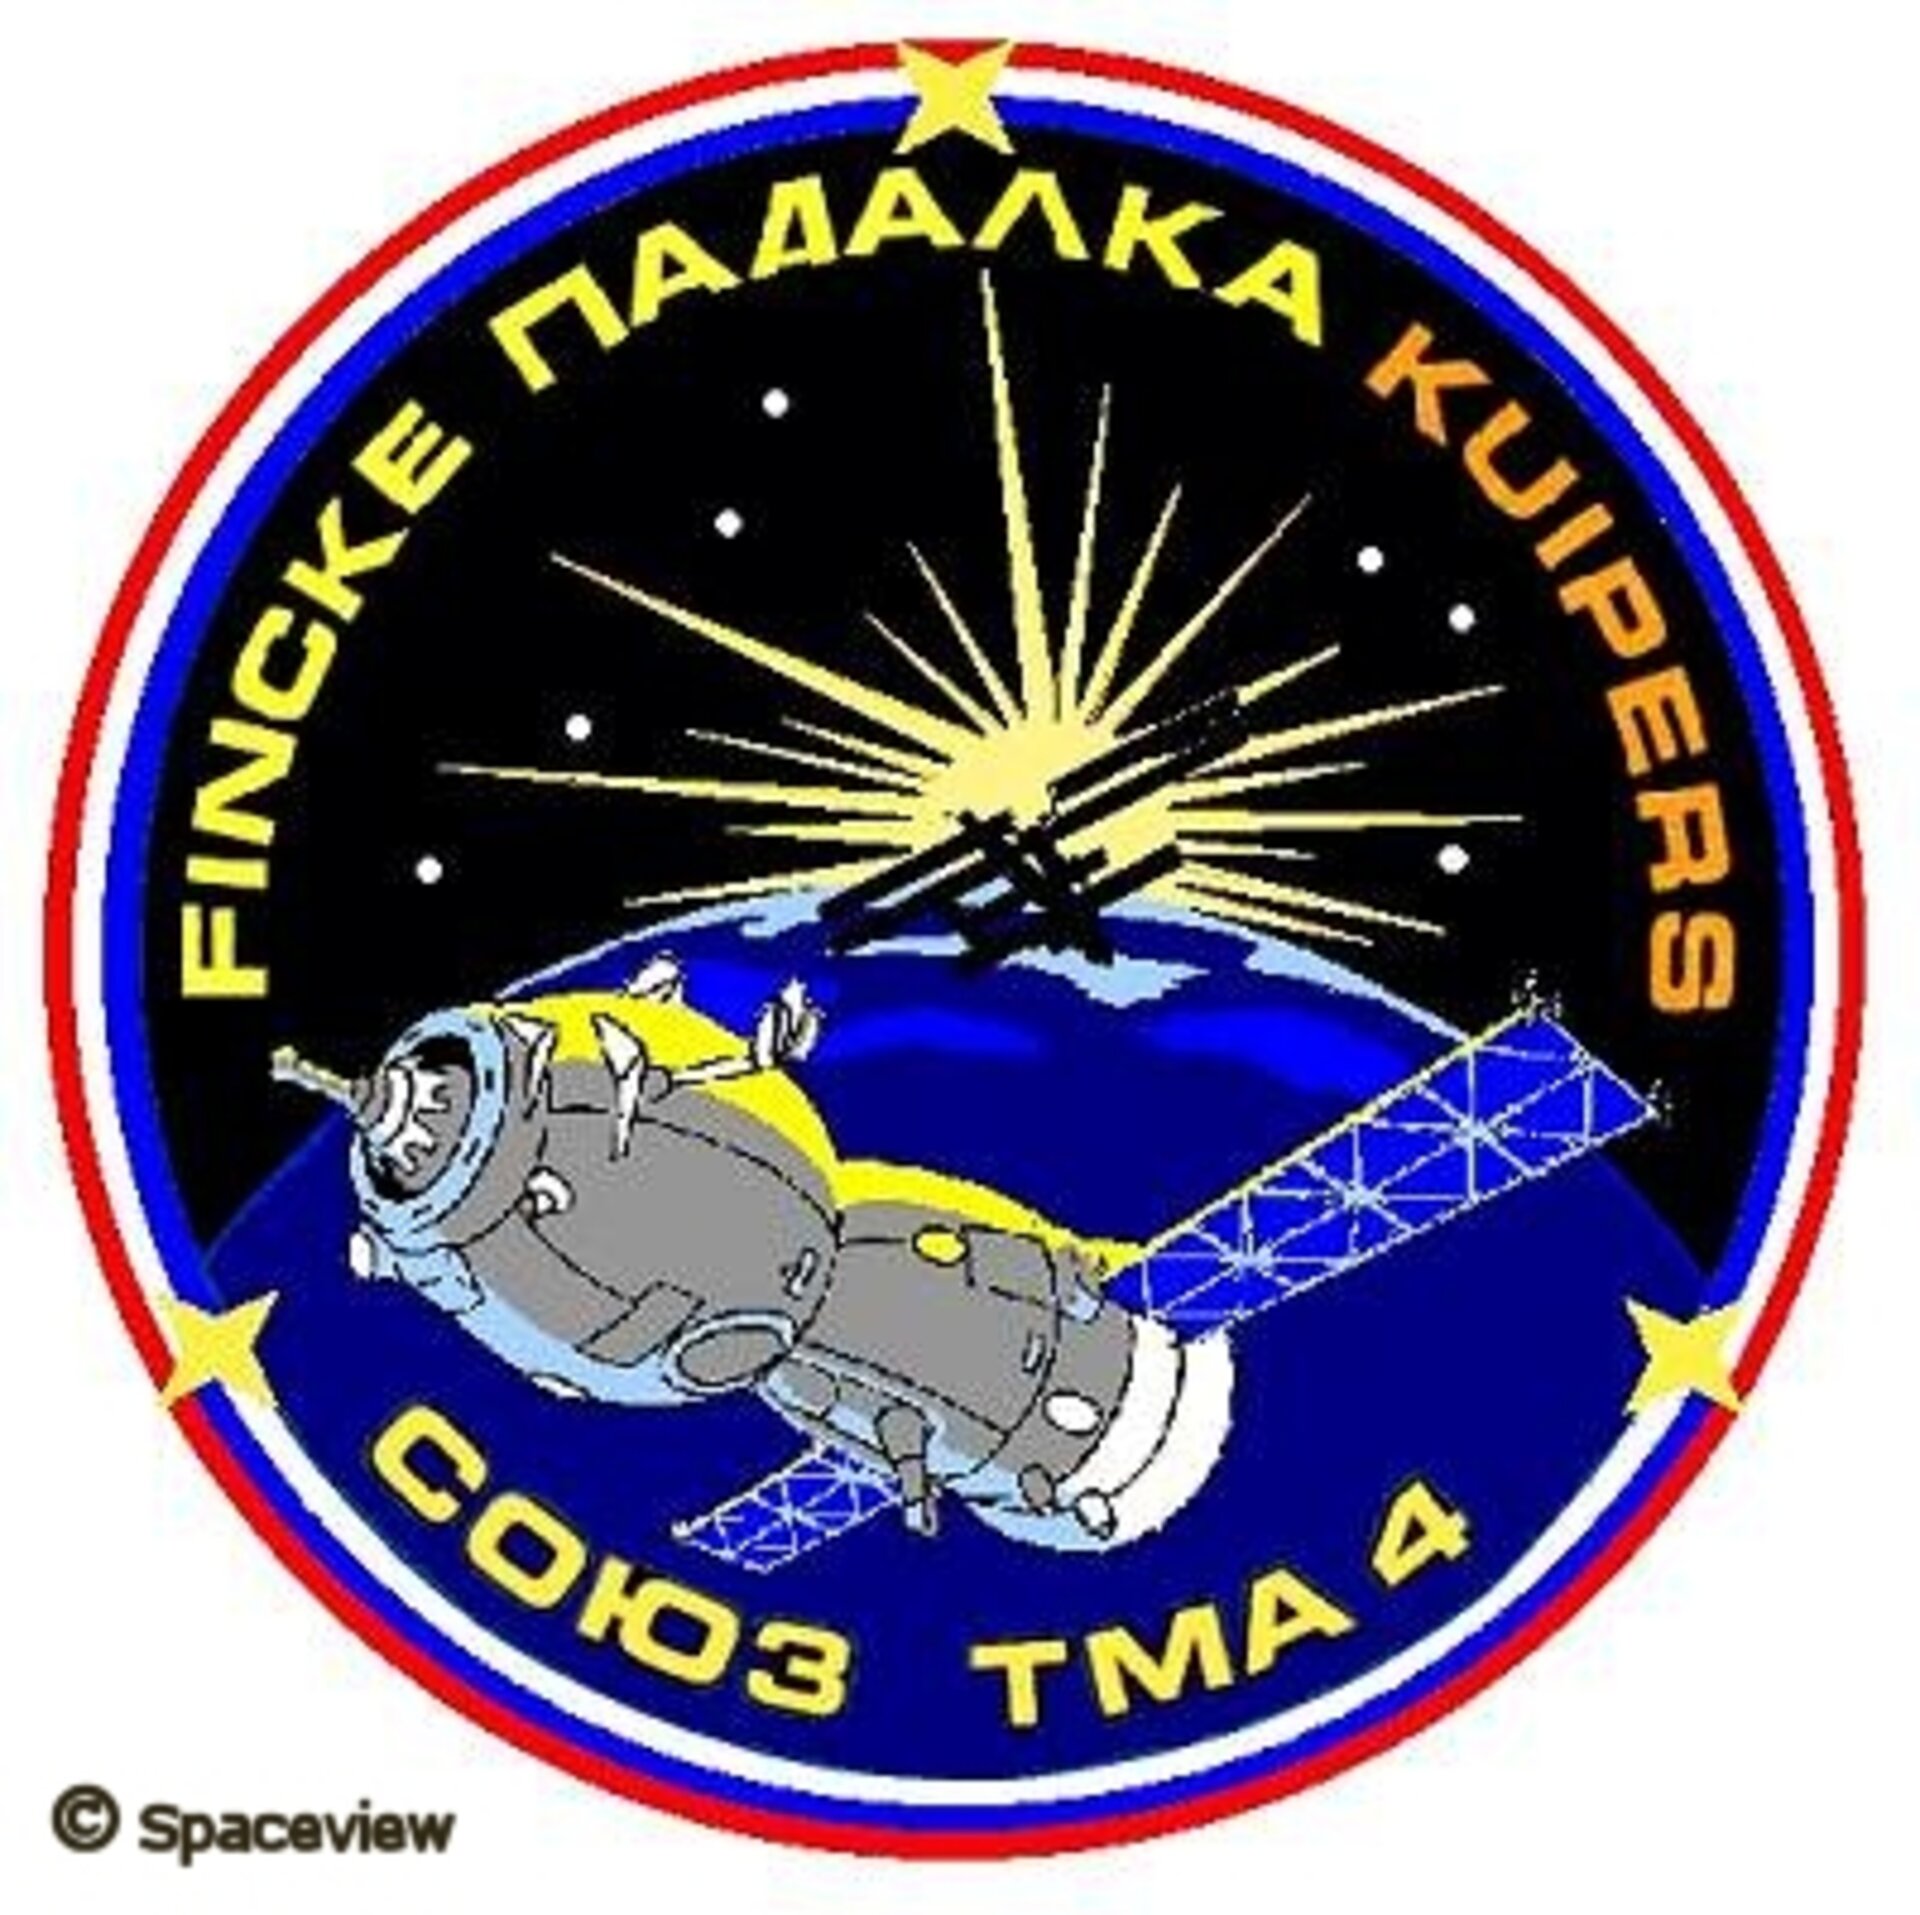 The mission patch for Soyuz TMA-4 flight 8S